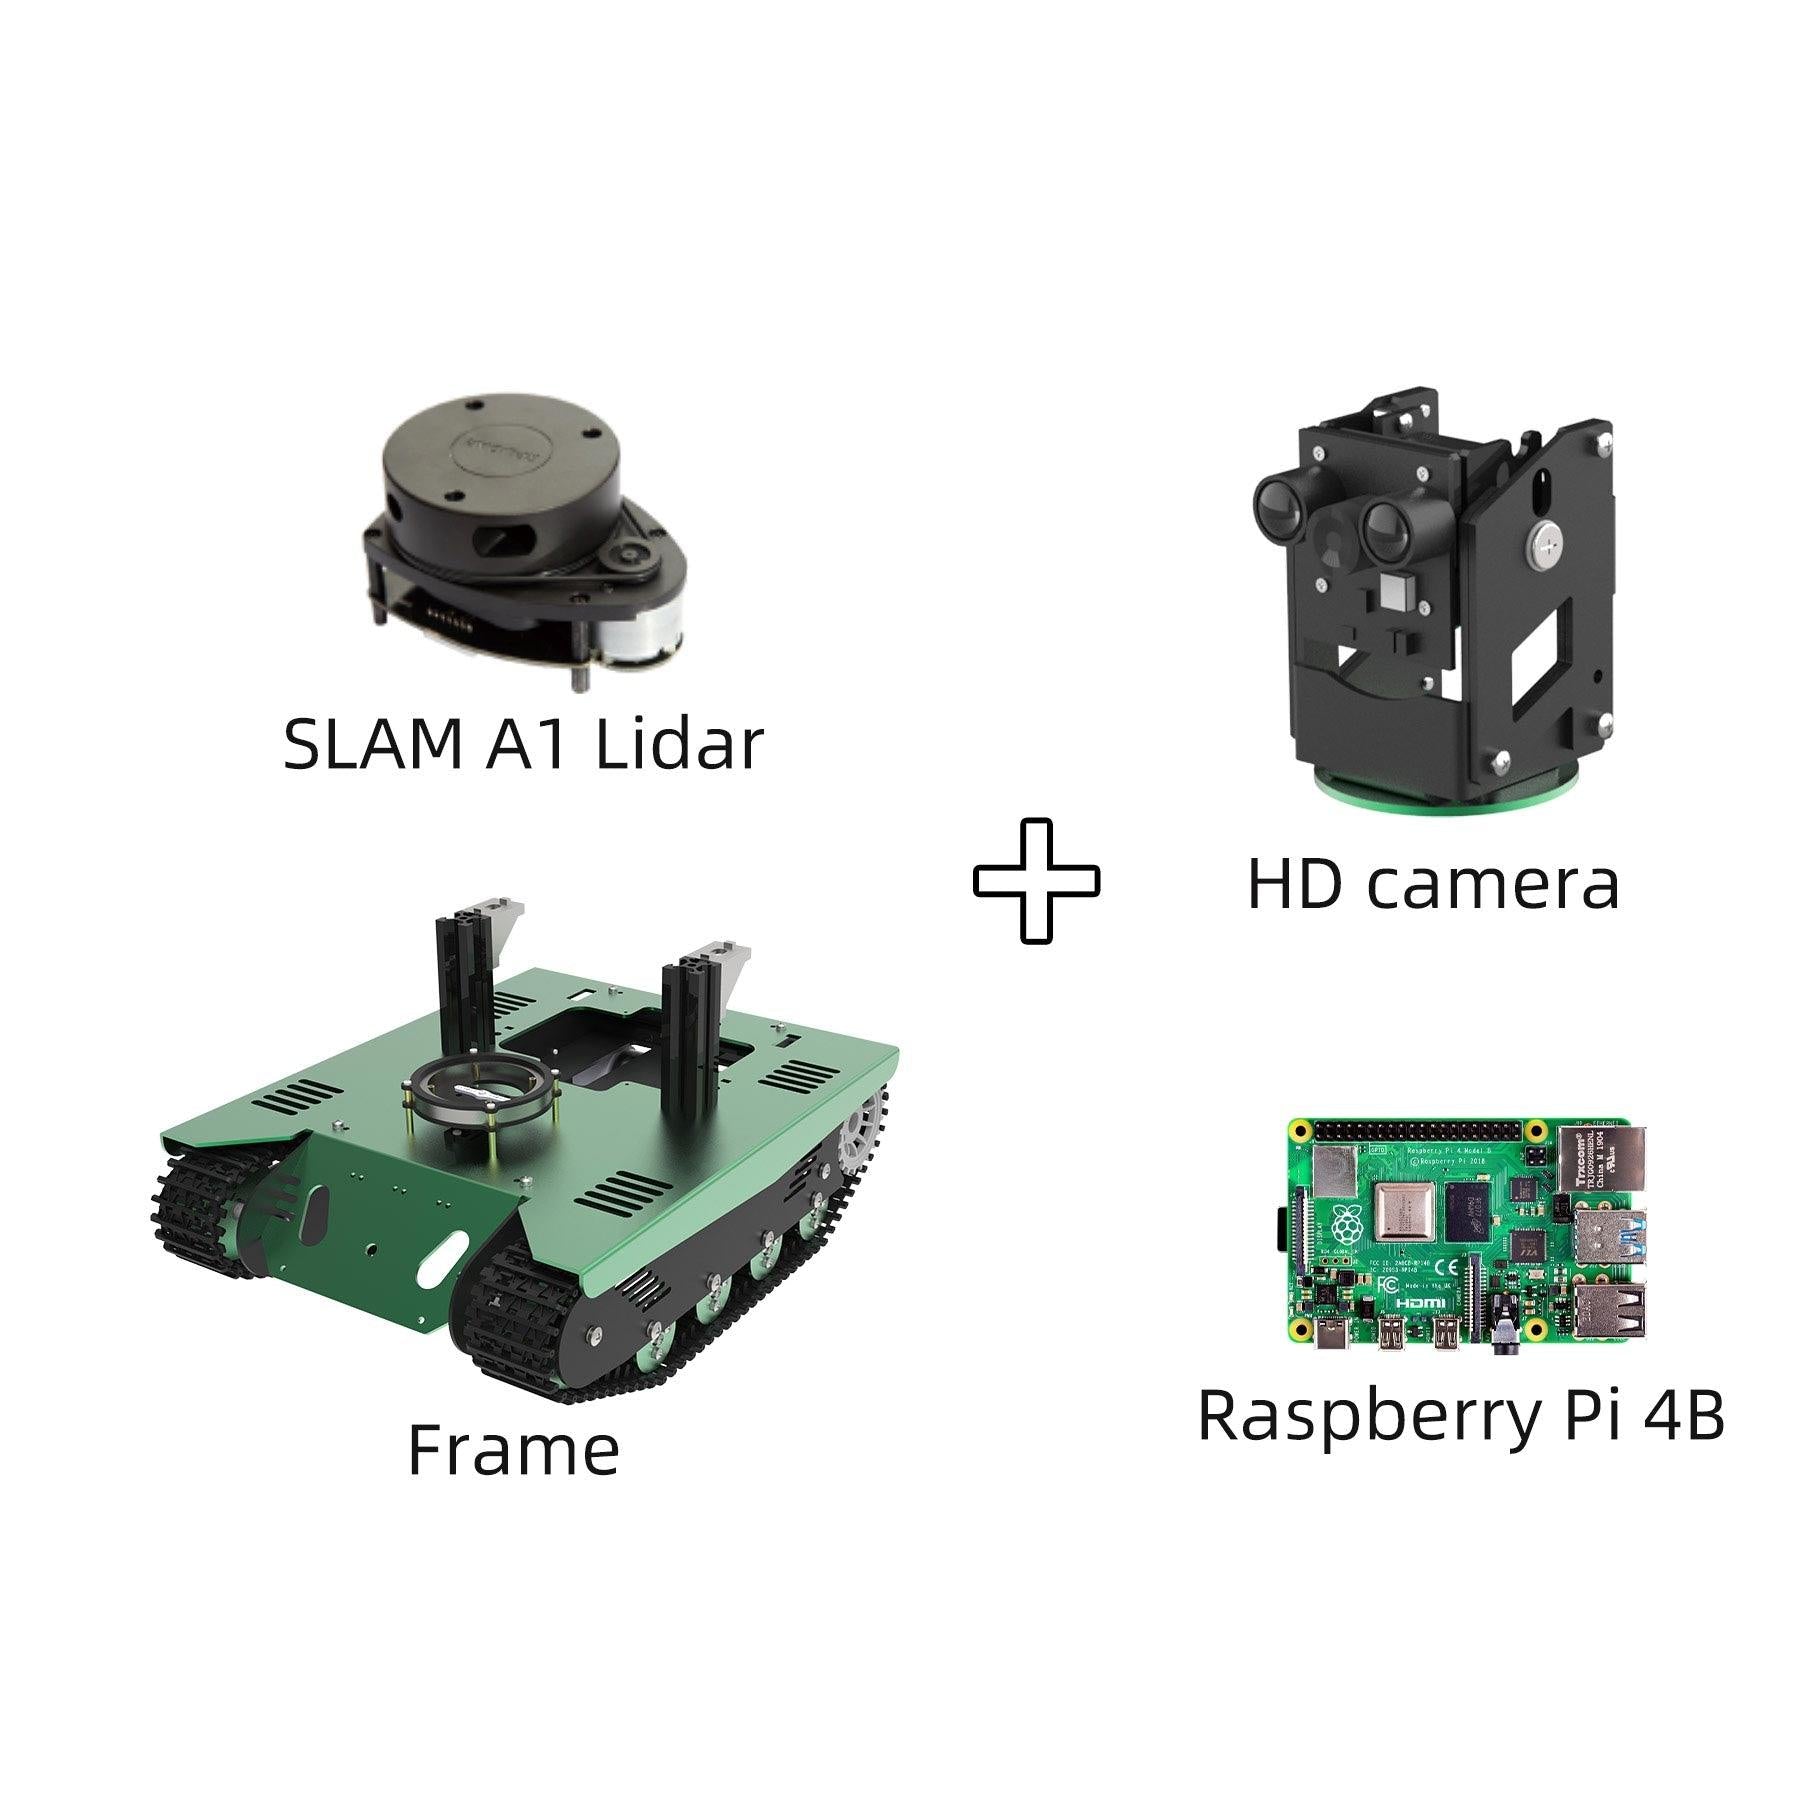 Yahboom ROS Transbot STEM Education Python Programming Robot with Lidar Depth camera MoveIt 3D mapping for Raspberry Pi